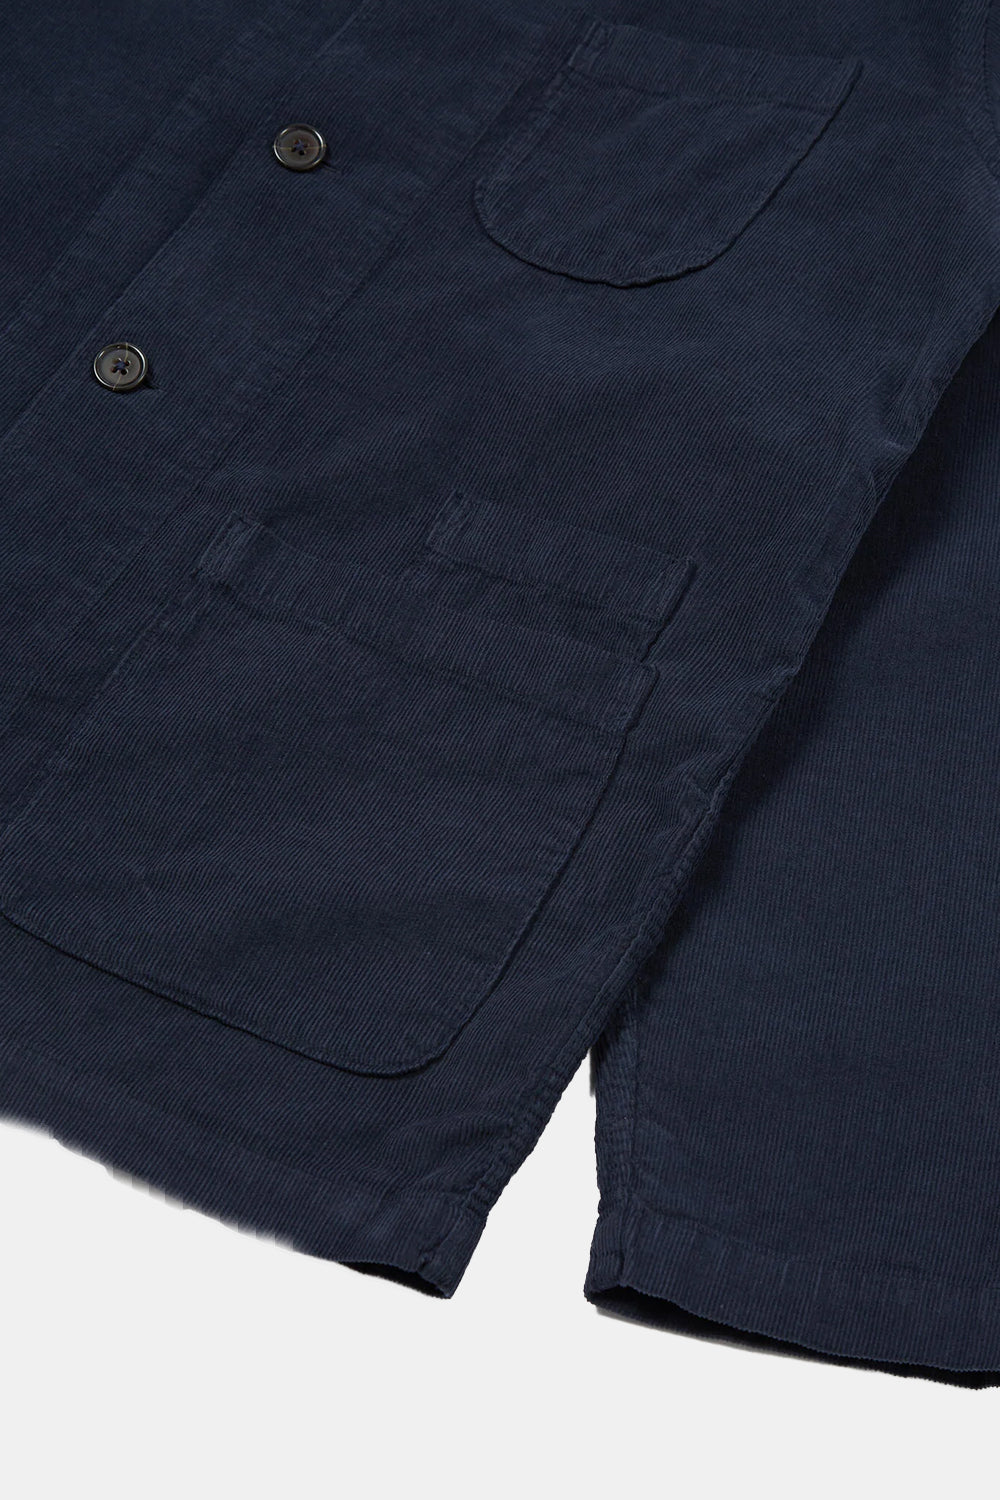 Universal Works Fine Cord Bakers Overshirt (Navy) | Number Six